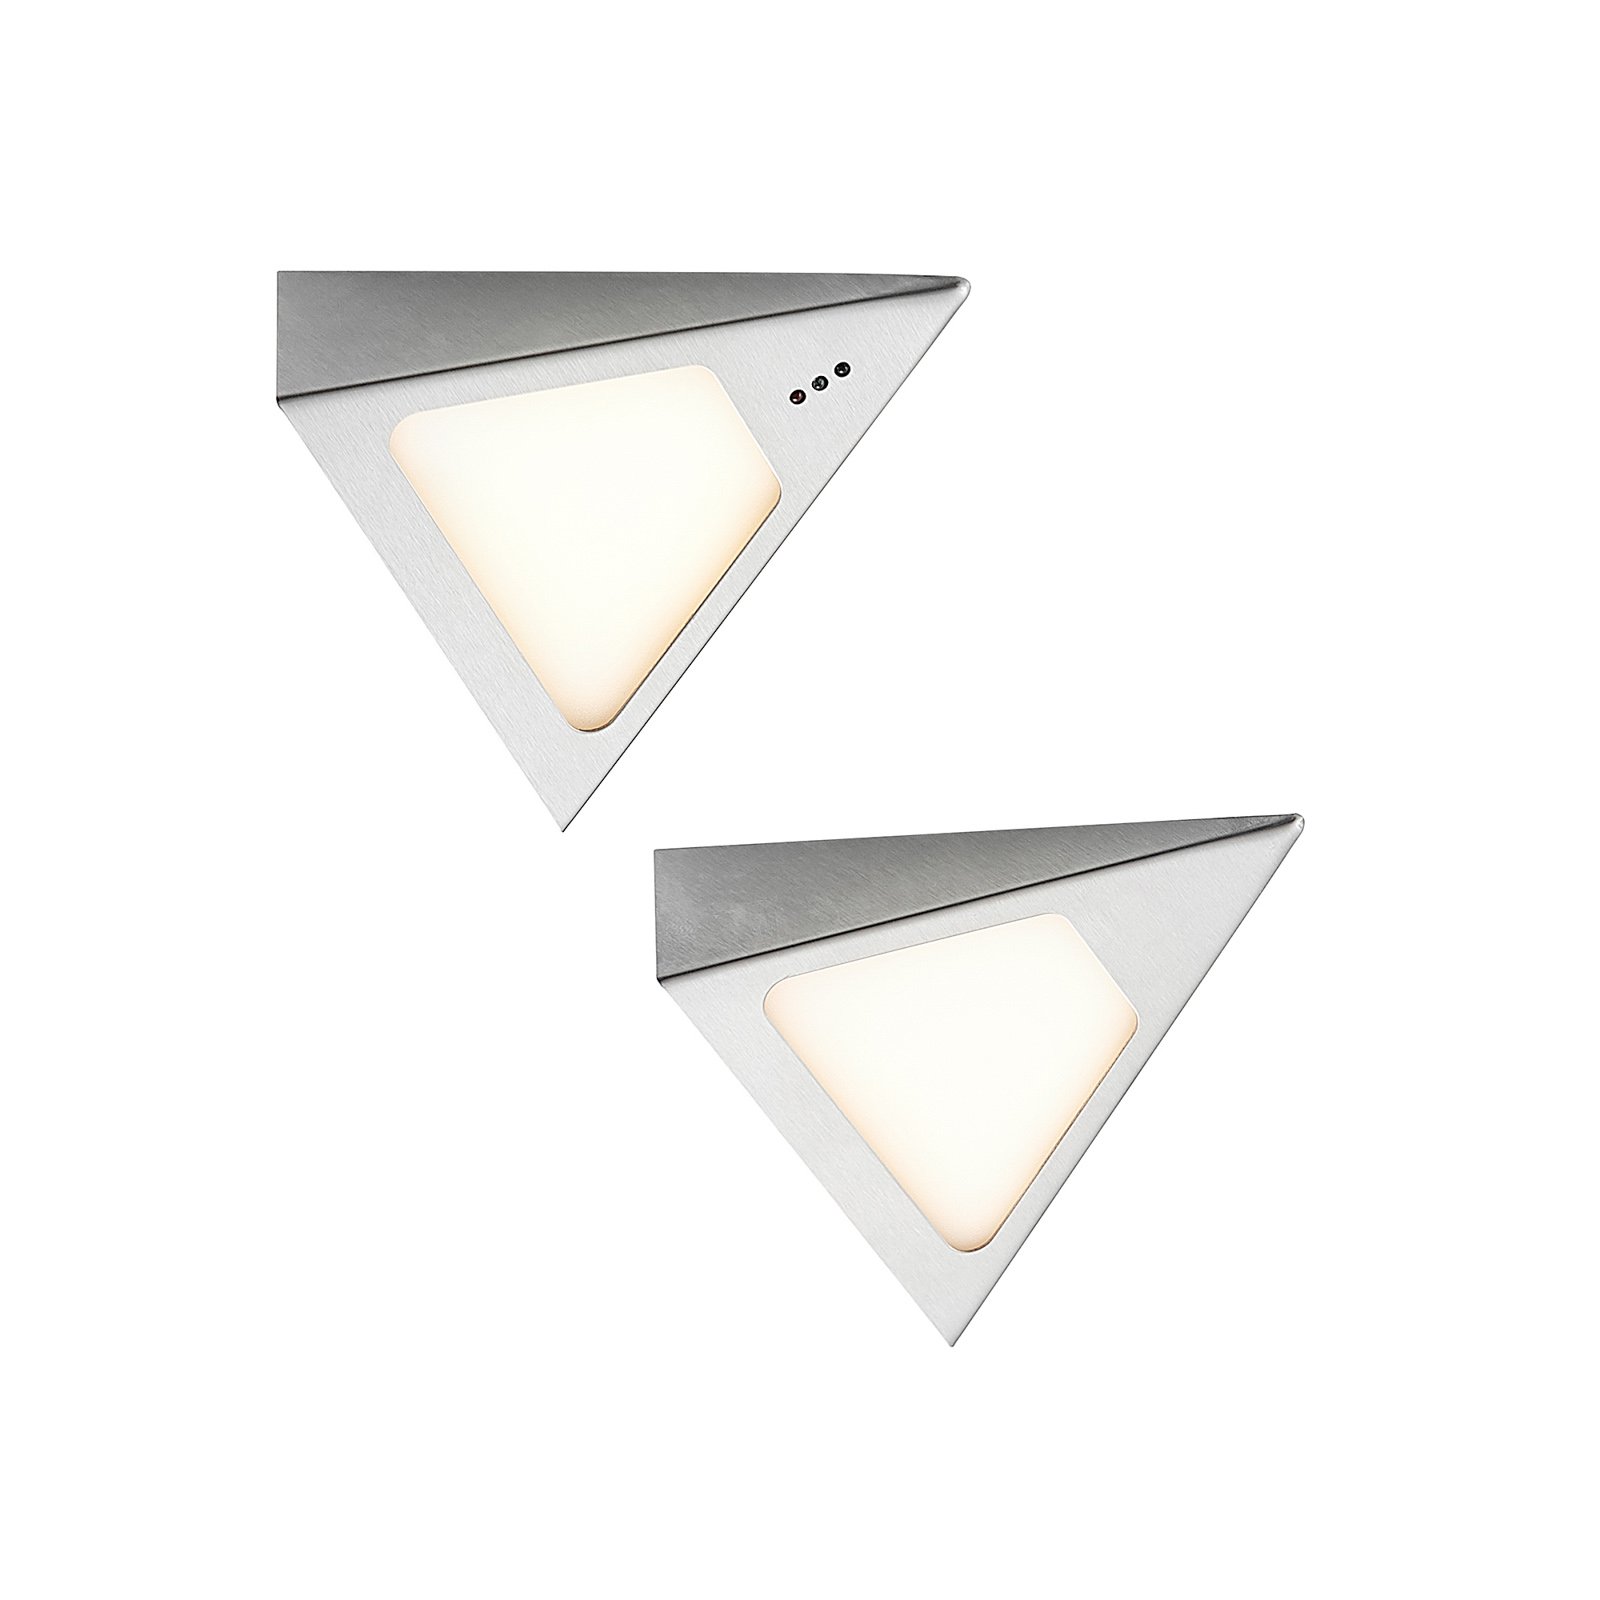 Prios Odia LED meubelverlichting 2-lamps